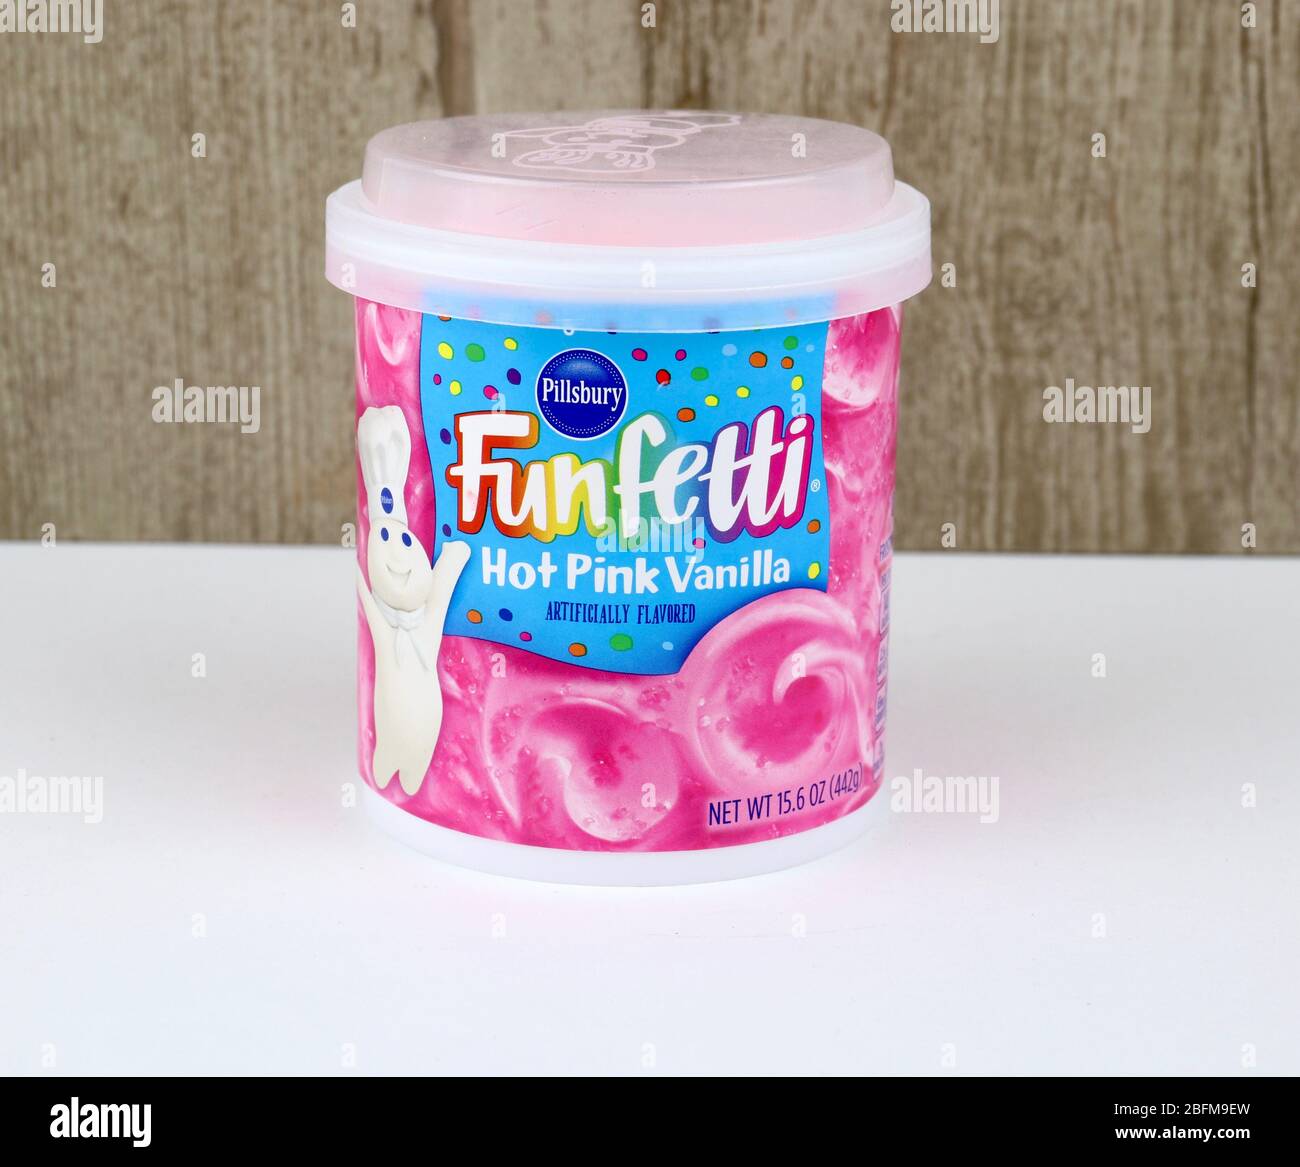 Spencer, Wisconsin, U.S.A. , April, 19, 2020   Container of Pillsbury Funfetti Hot Pink Vanilla Frosting  Pillbury is an American based food company Stock Photo